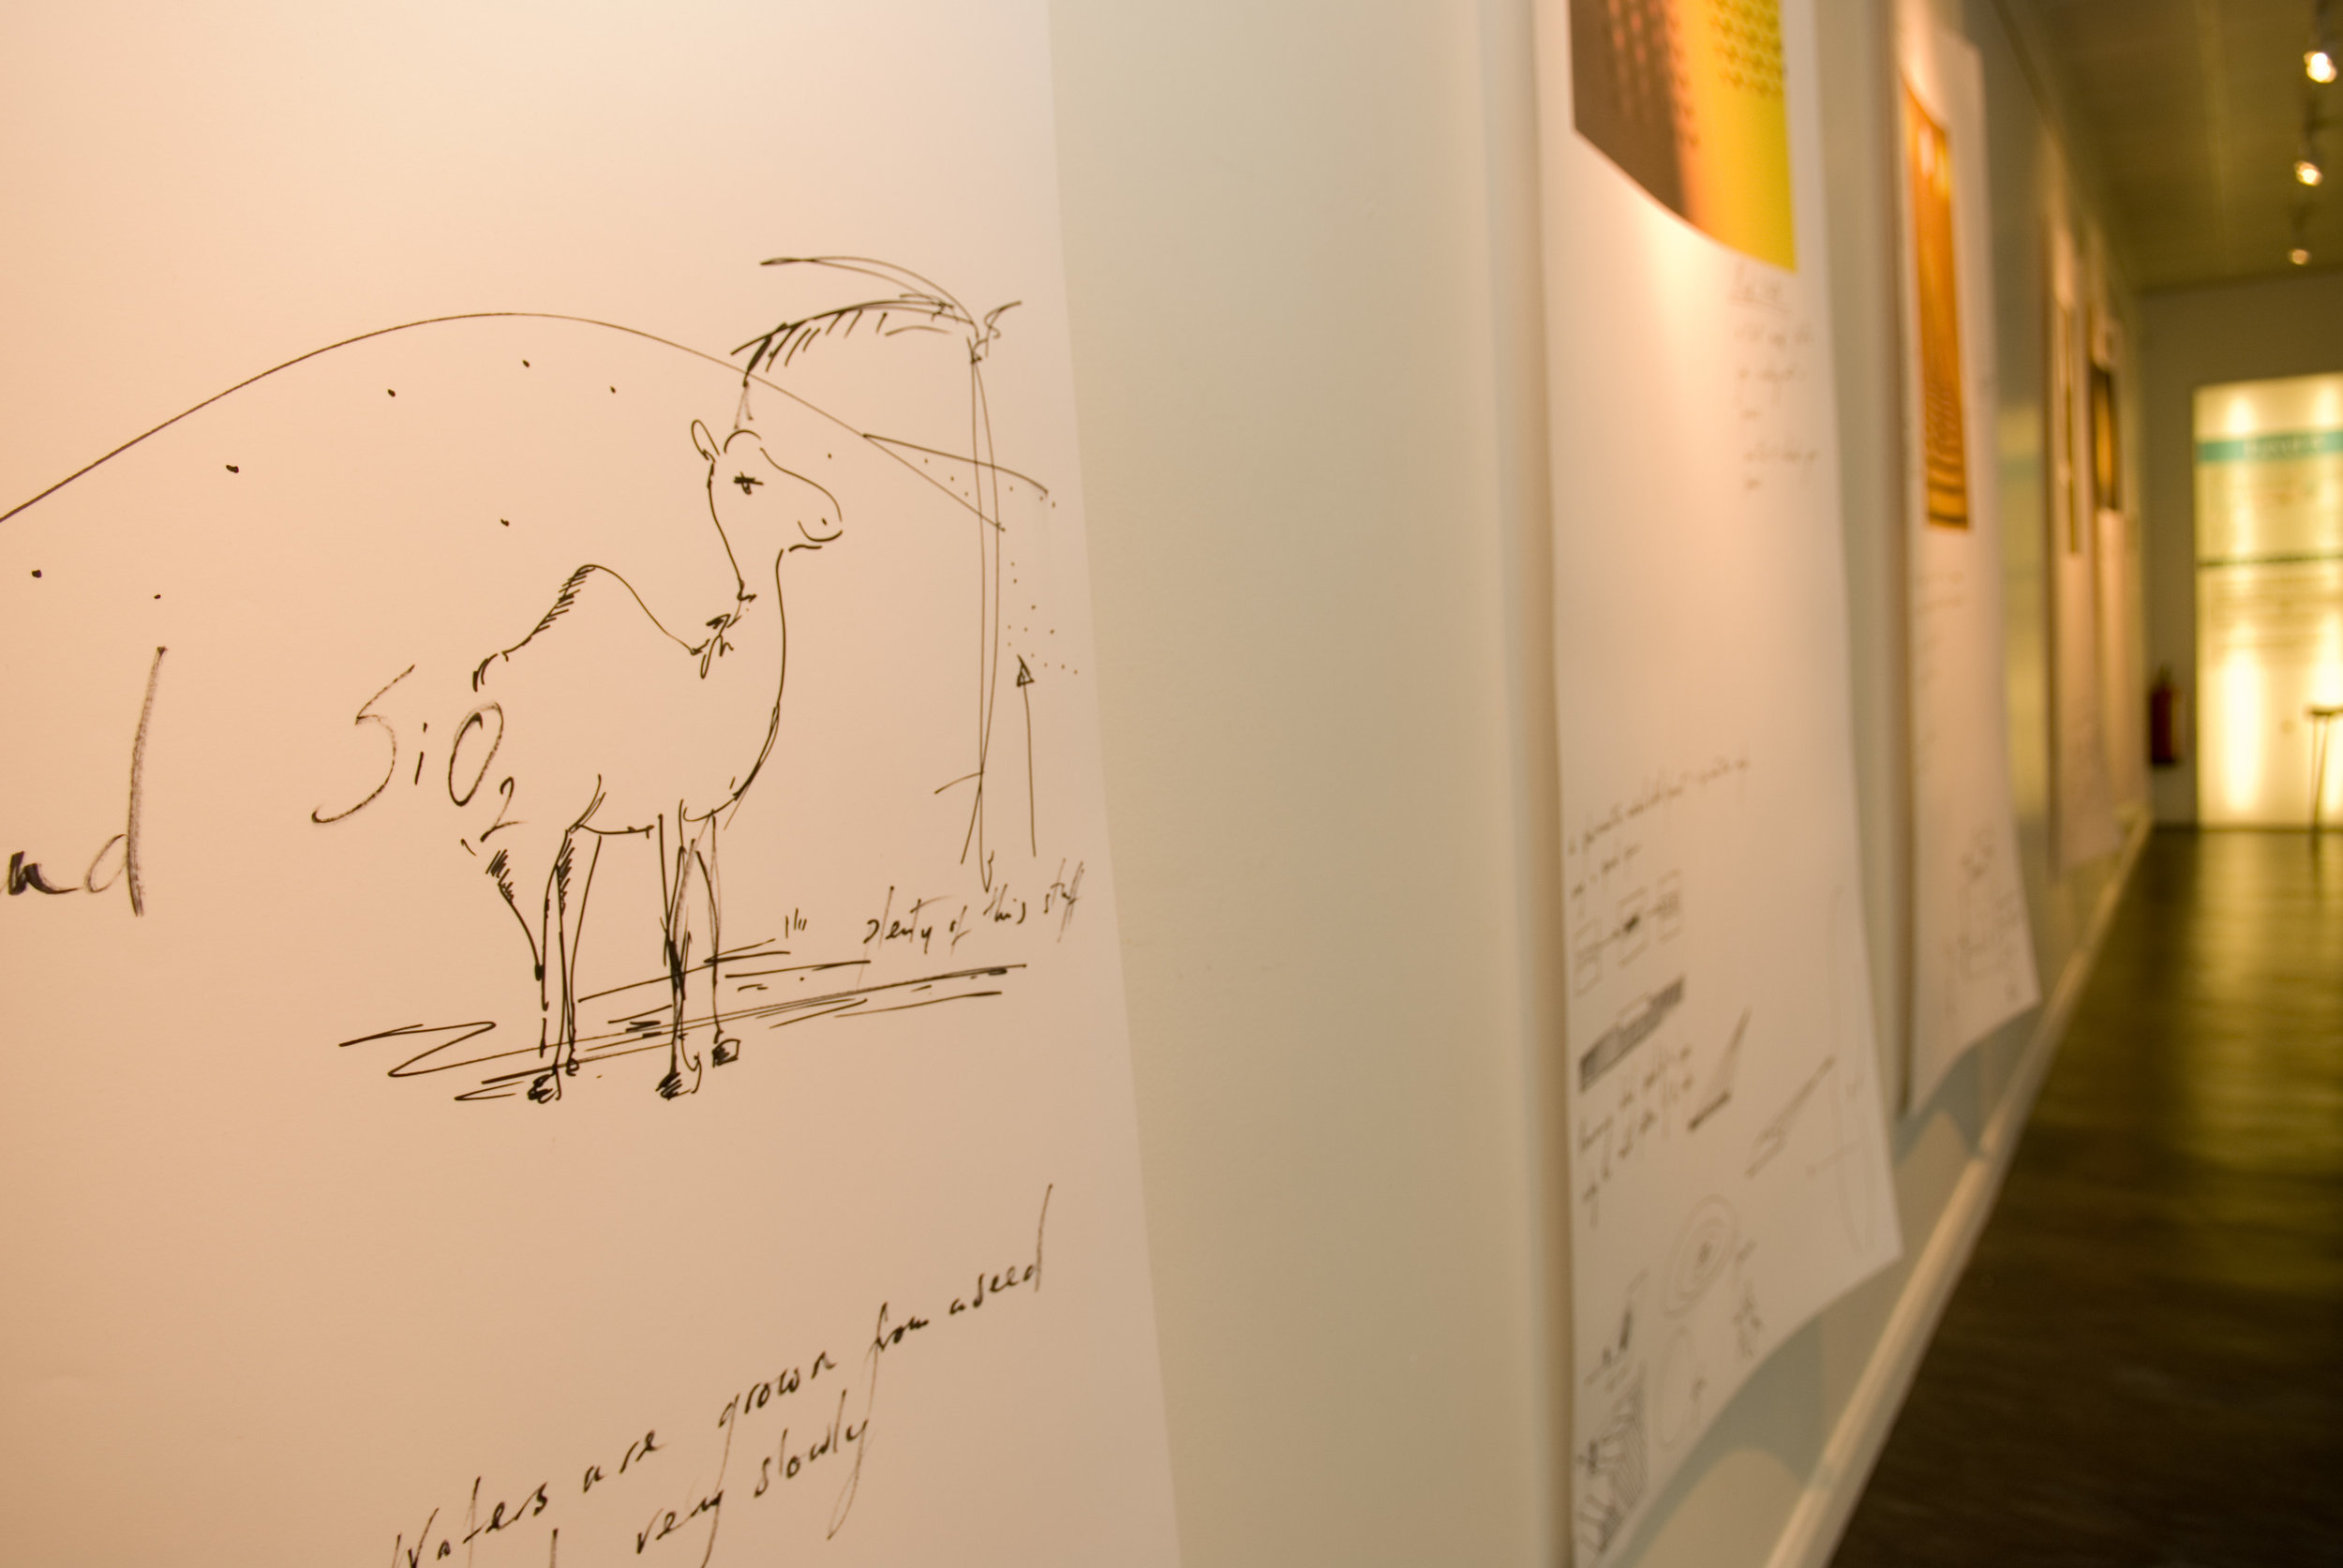 the final exhibition combined large printed images with drawings and was accompanied by musicians "the Paragon Assembly" who composed music inspired by semi conductors.